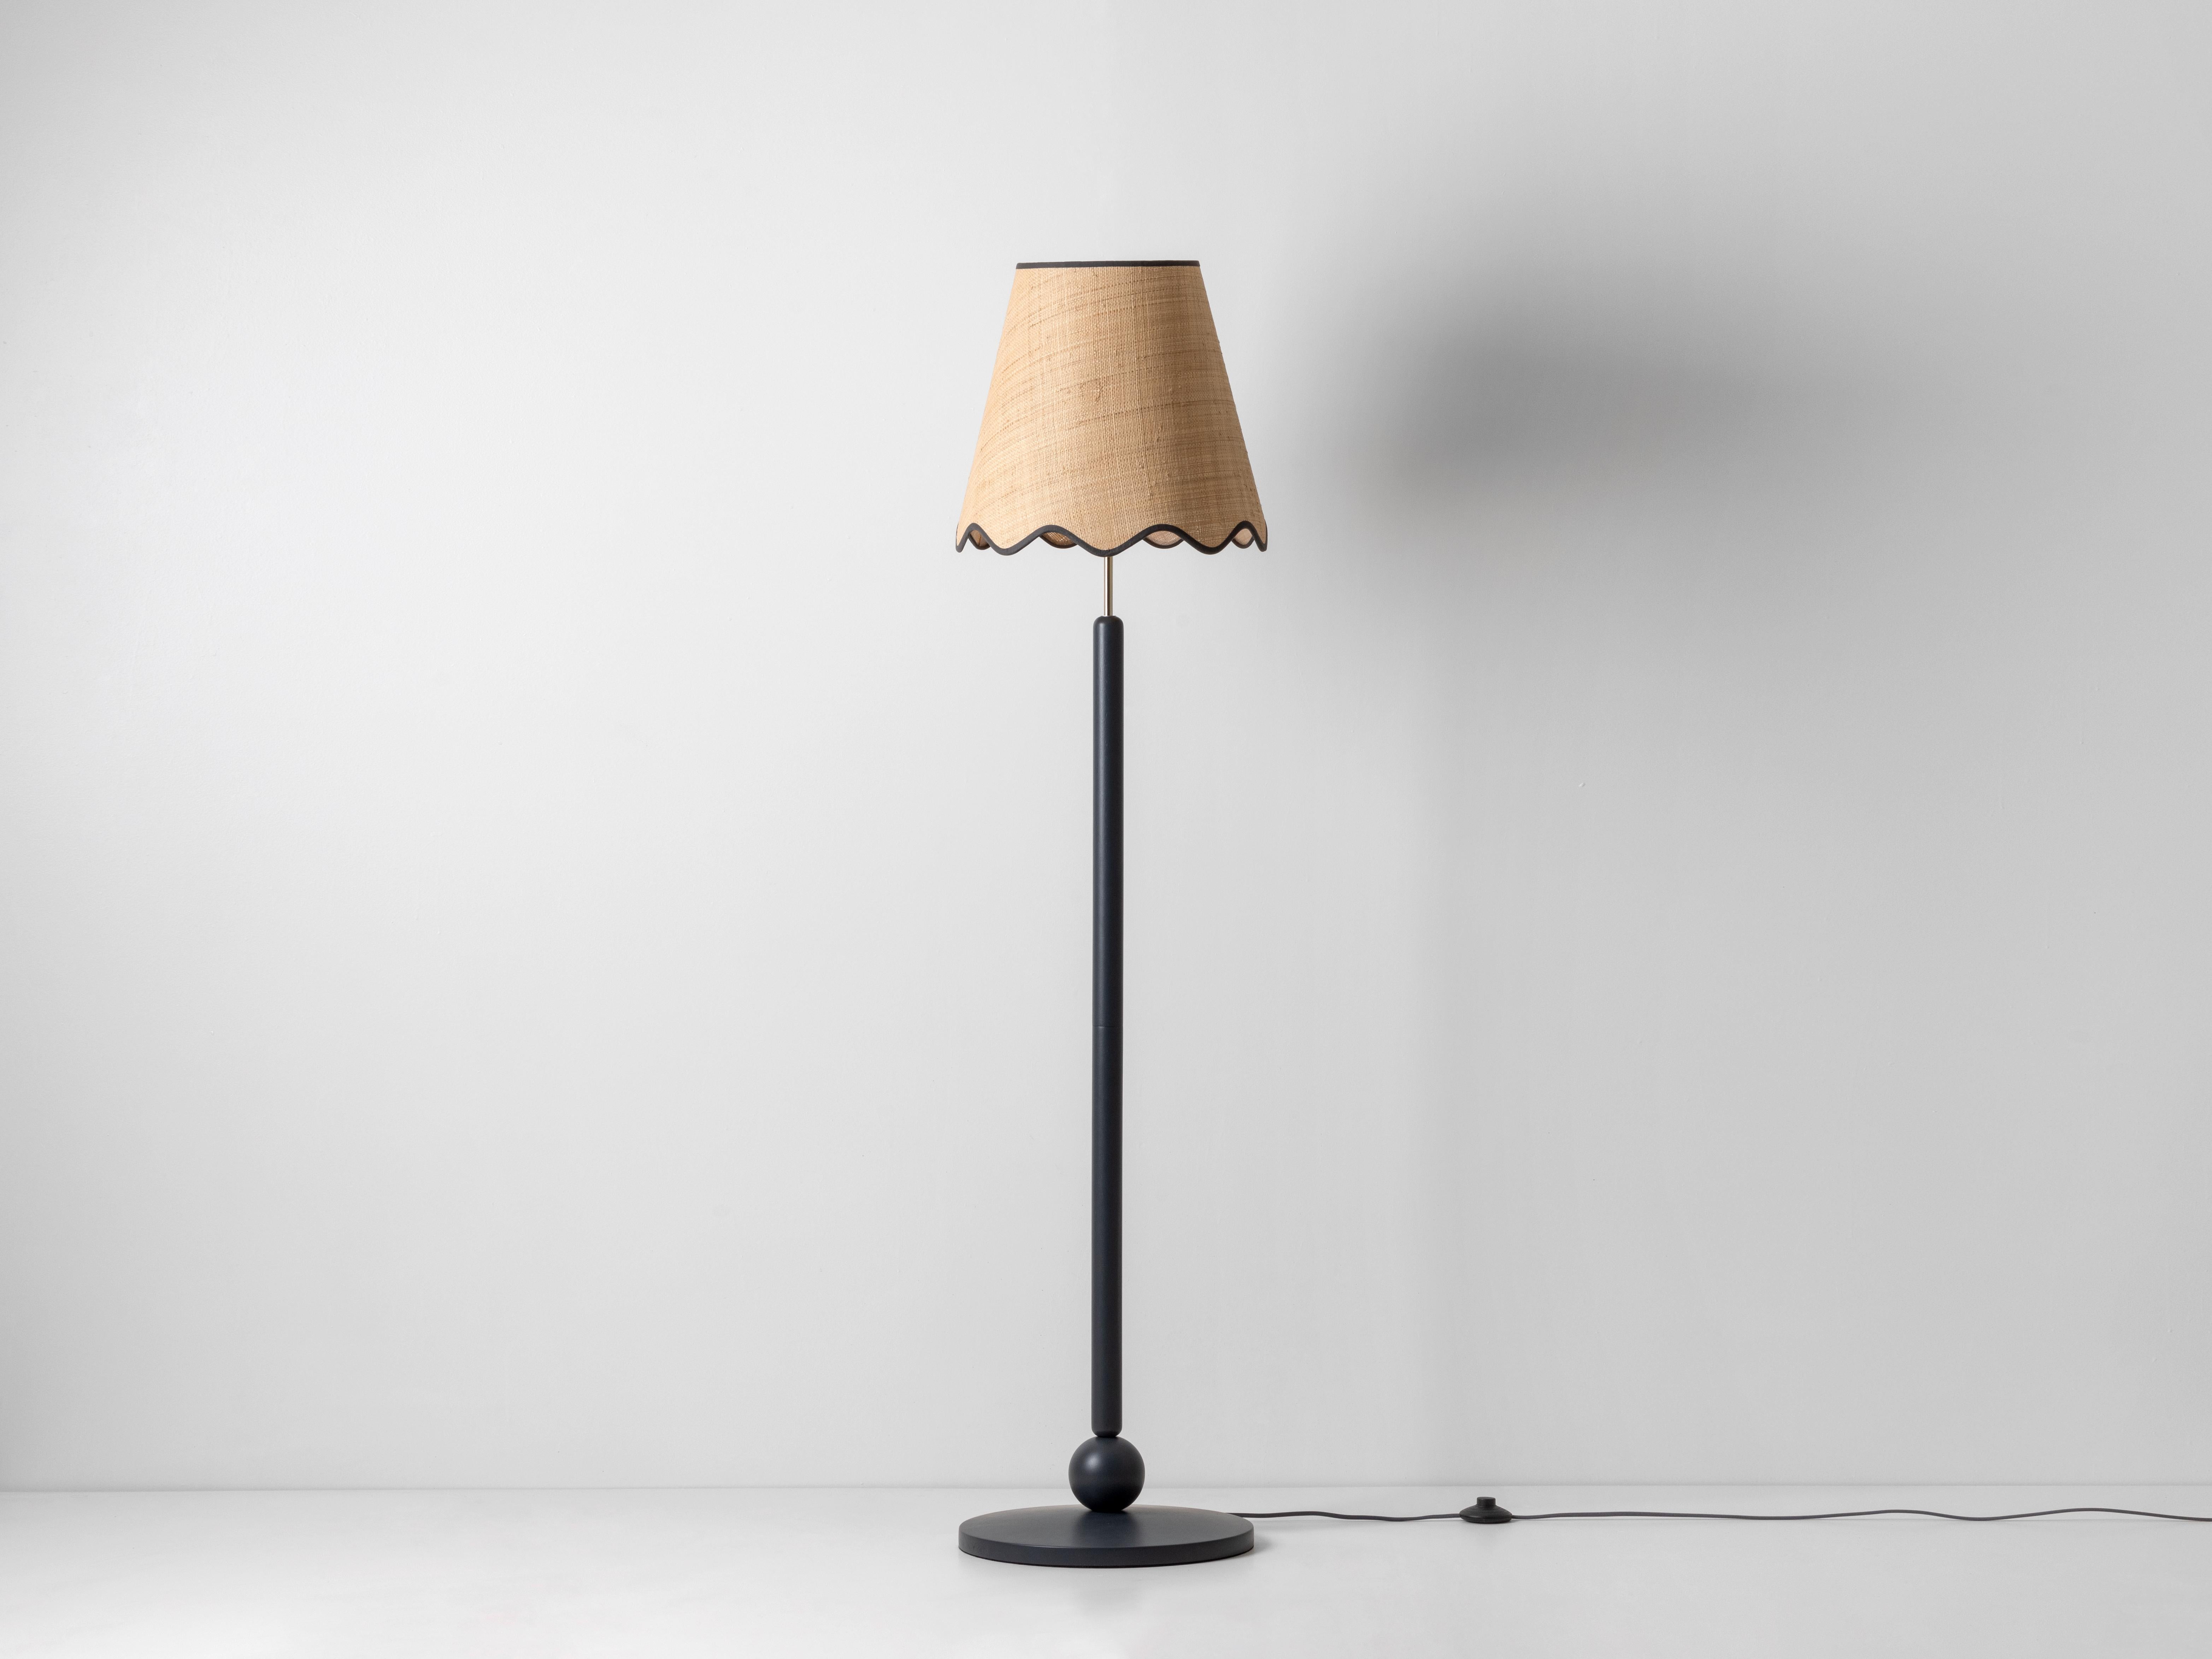 Using traditional materials and techniques, this turned wood lamp is the perfect way to add texture and warmth to your space. The wooden base has been painted in our signature Charcoal Grey, to perfectly complement and contrast against the natural